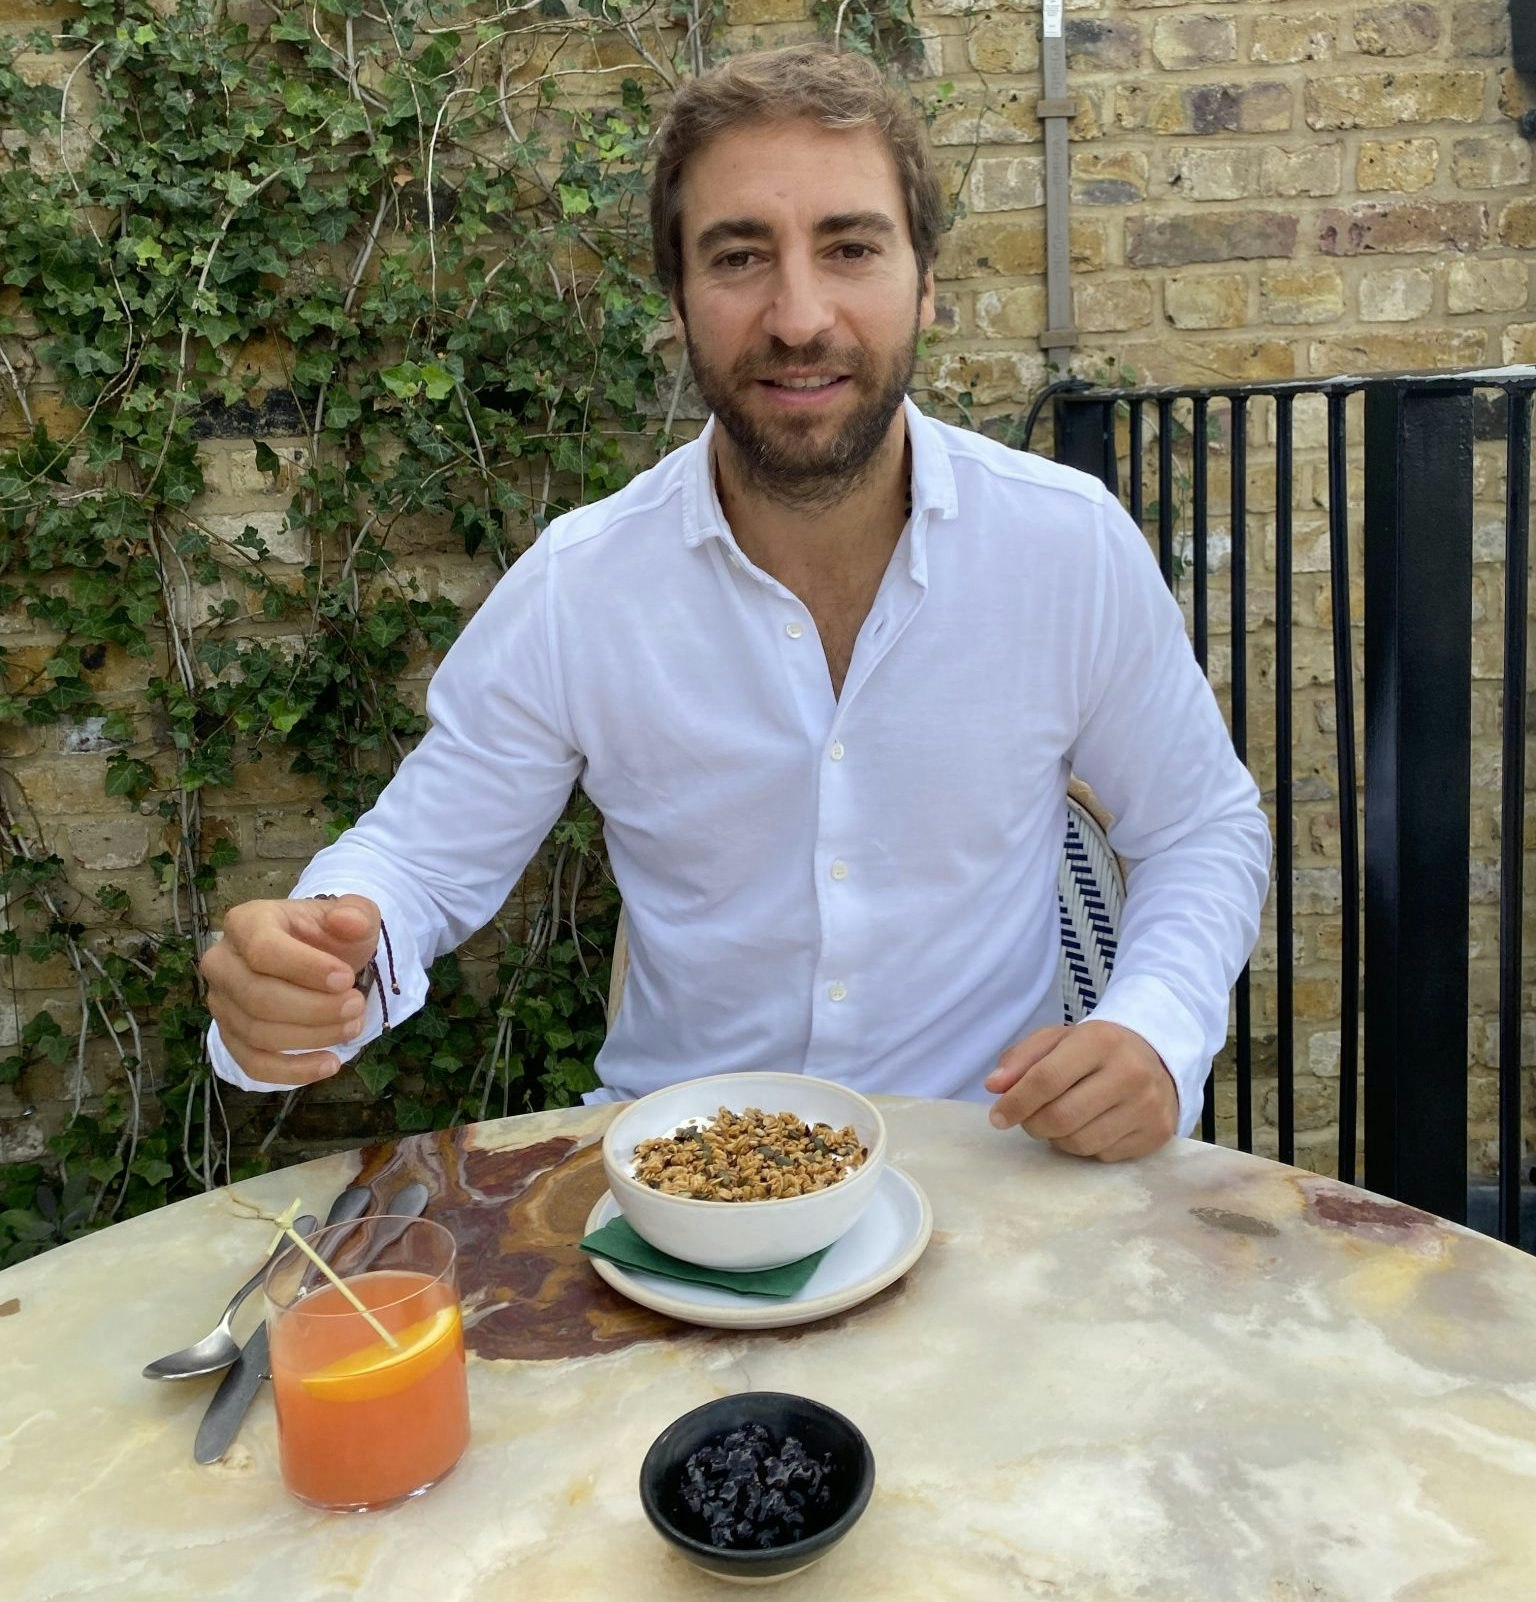 An image of Mathieu Flamini about to eat some granola